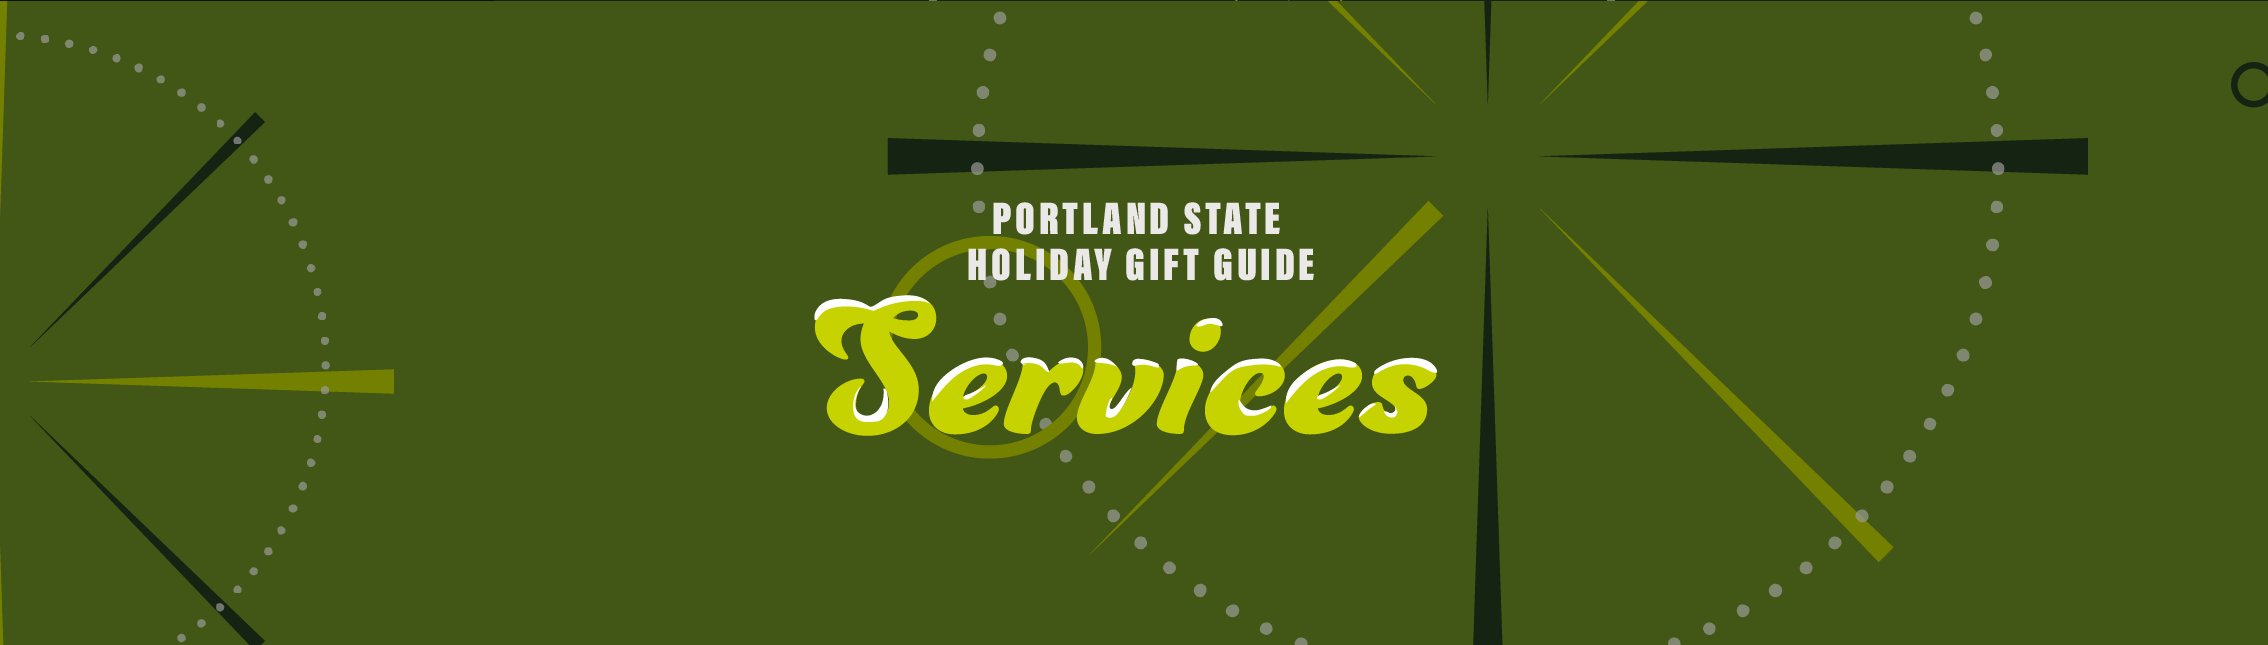 Portland State Holiday Gift Guide Services